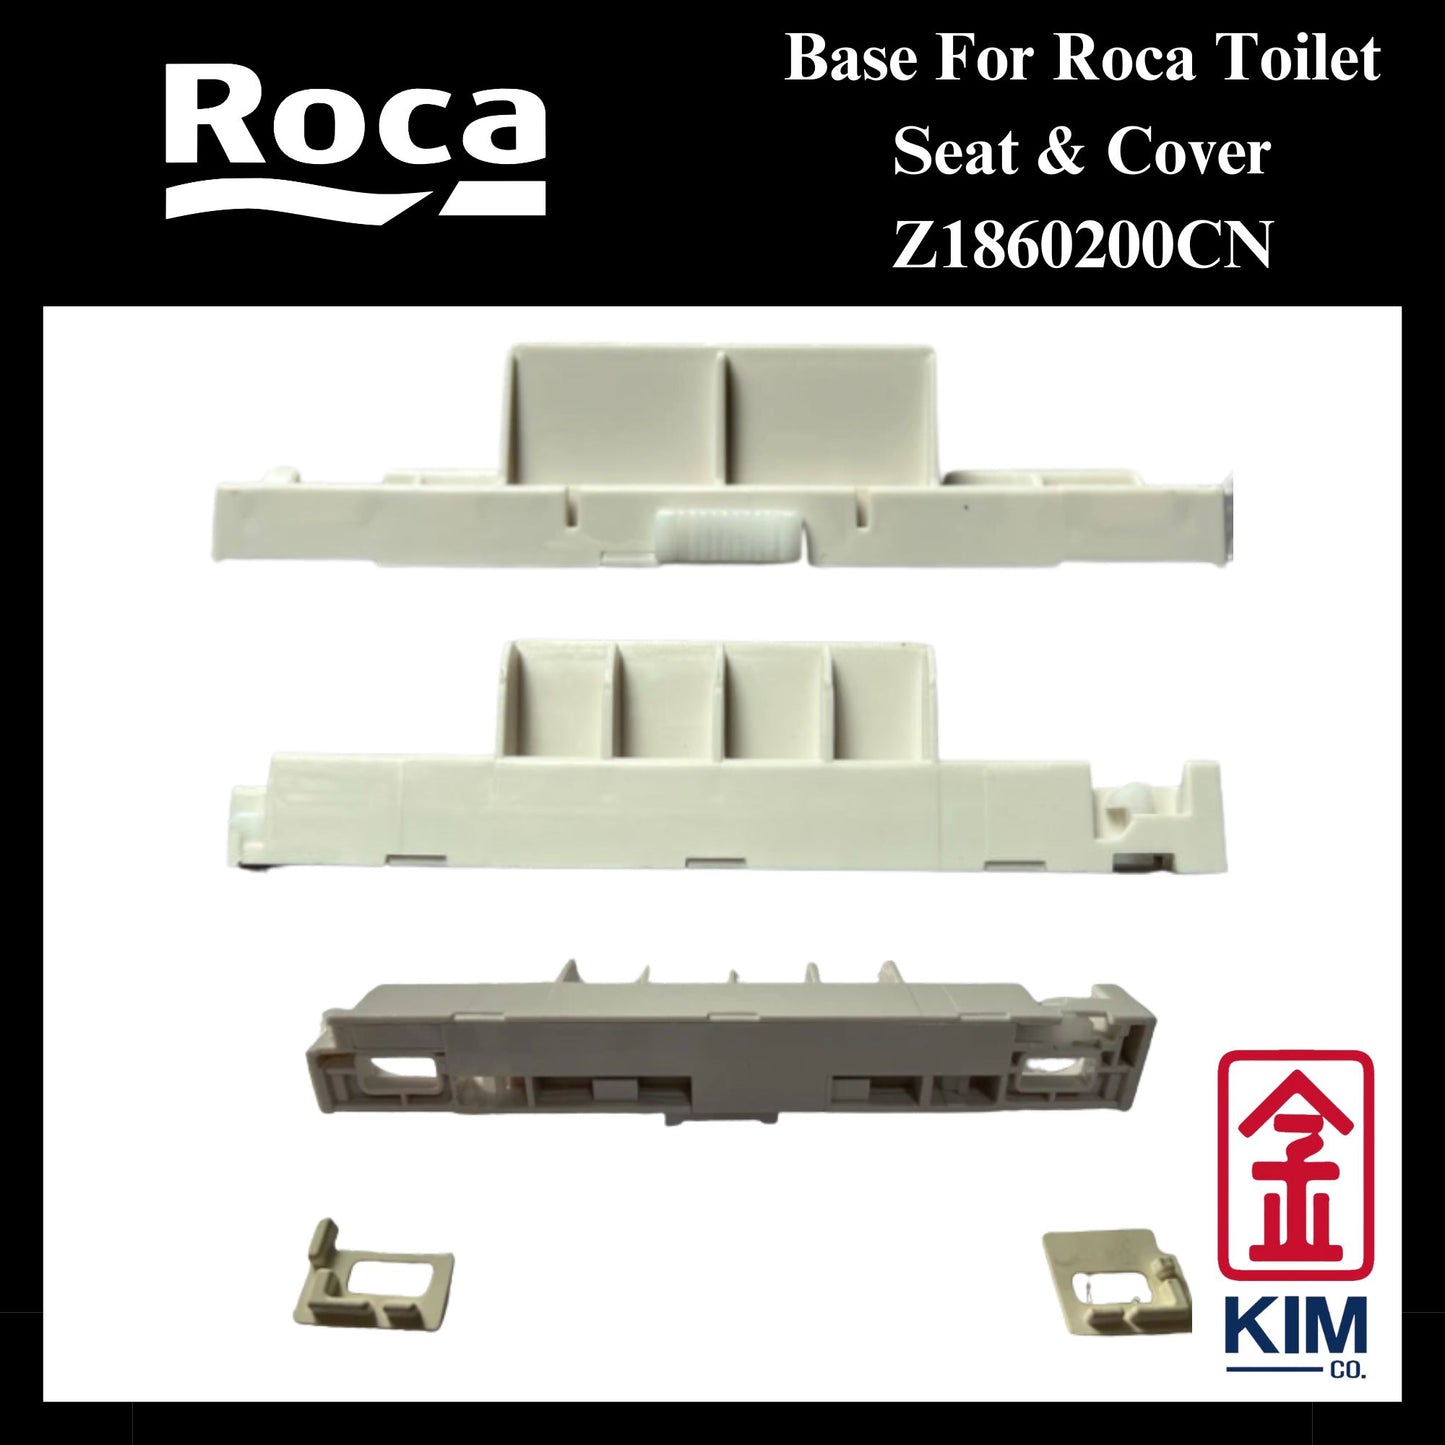 Base For Roca Toilet Seat & Cover (Z1860200CN)